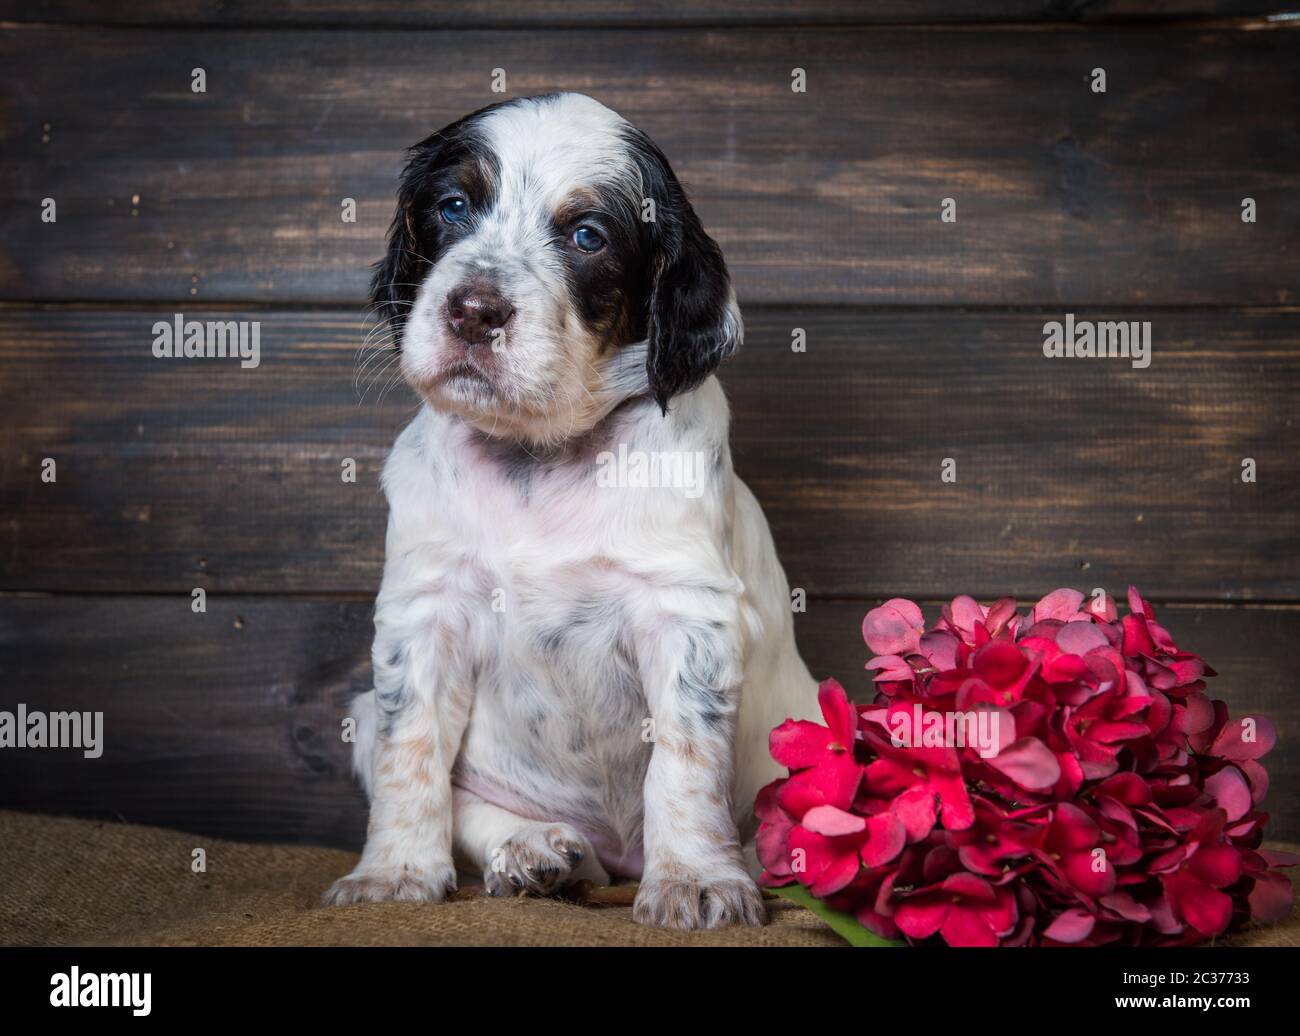 Cute English Setter puppy dog studio portrait isolated on brown wooden background. Stock Photo